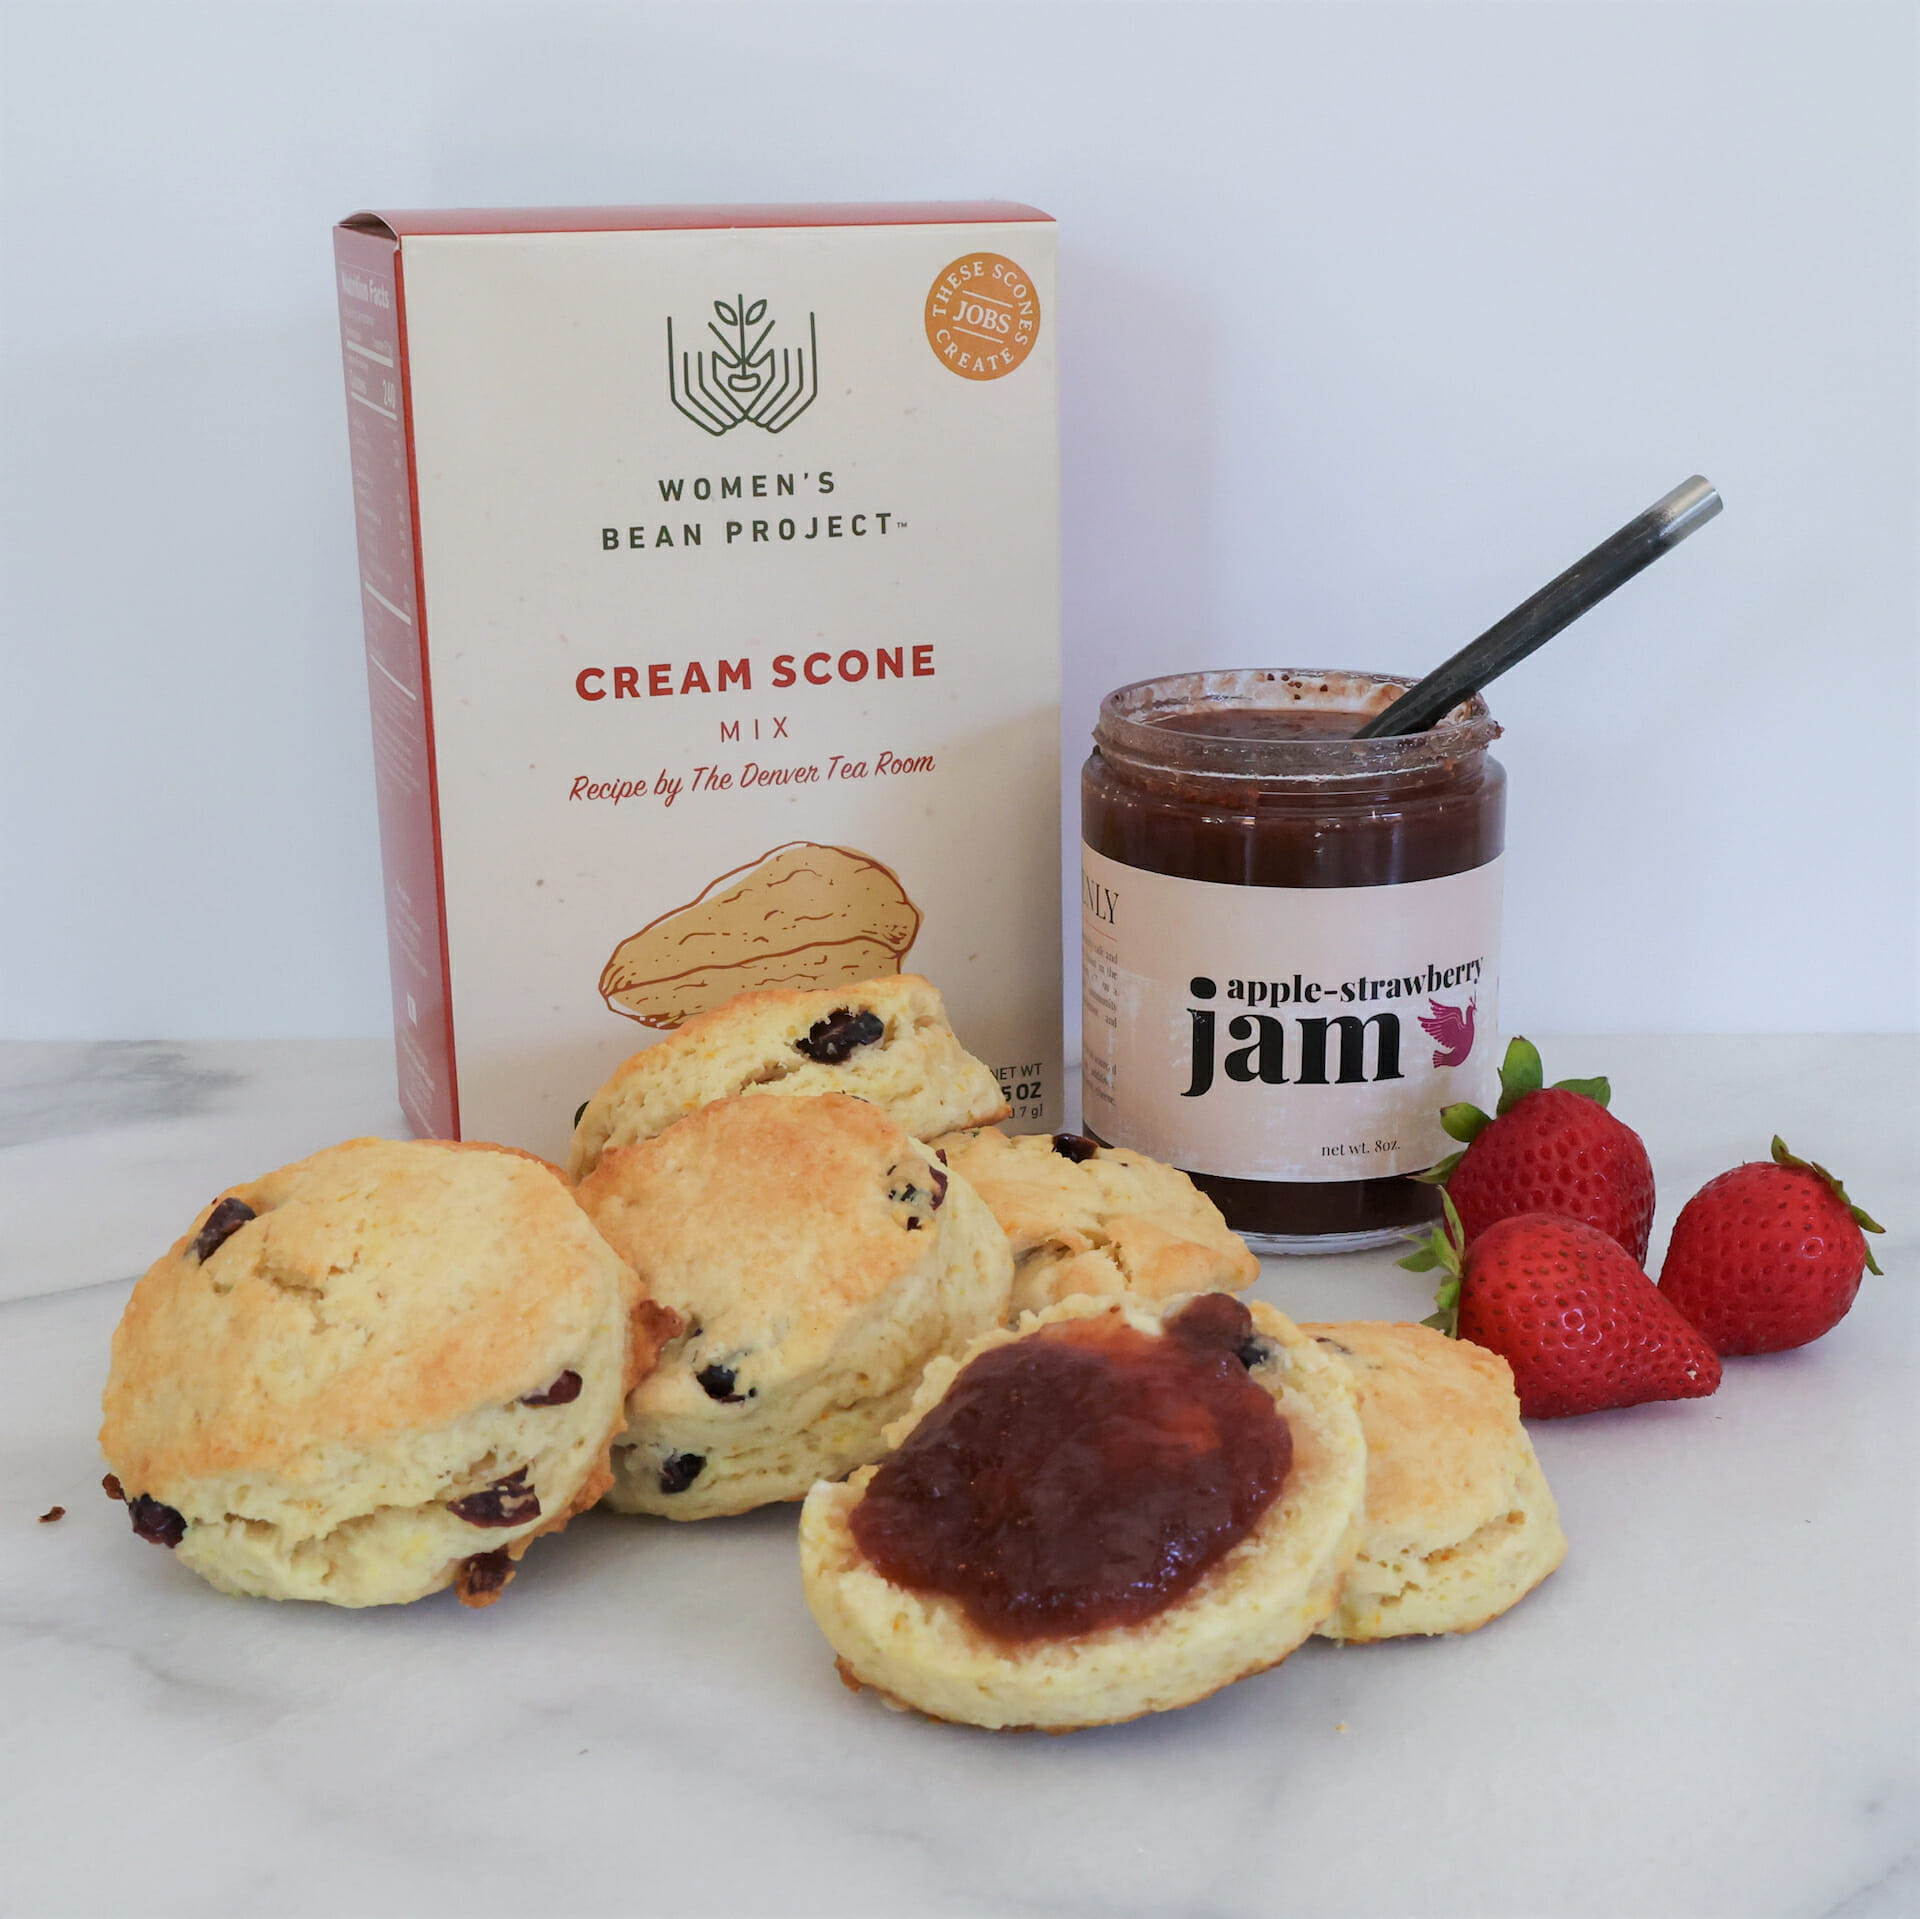 The scones and jam gift basket includes scone mix and apple strawberry jam. The photo shows baked scones with jam and fresh strawberries.